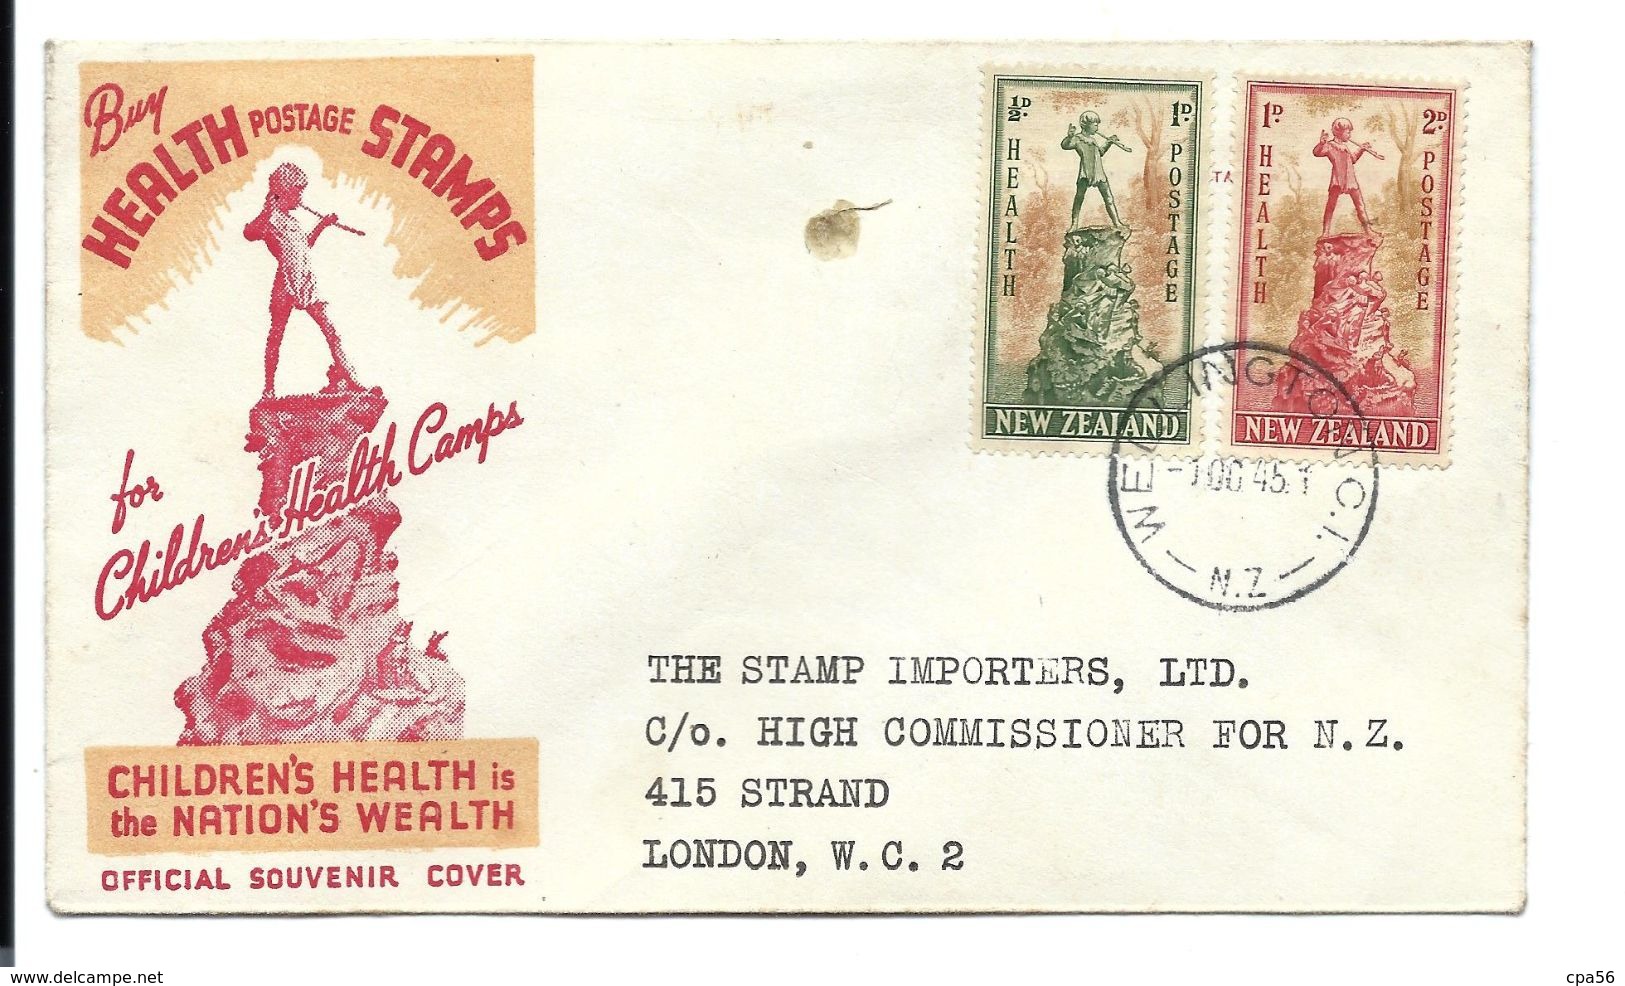 NEW ZEALAND > 2 Health Postage Stamps On Official Souvenir Cover Letter 1945 - Covers & Documents